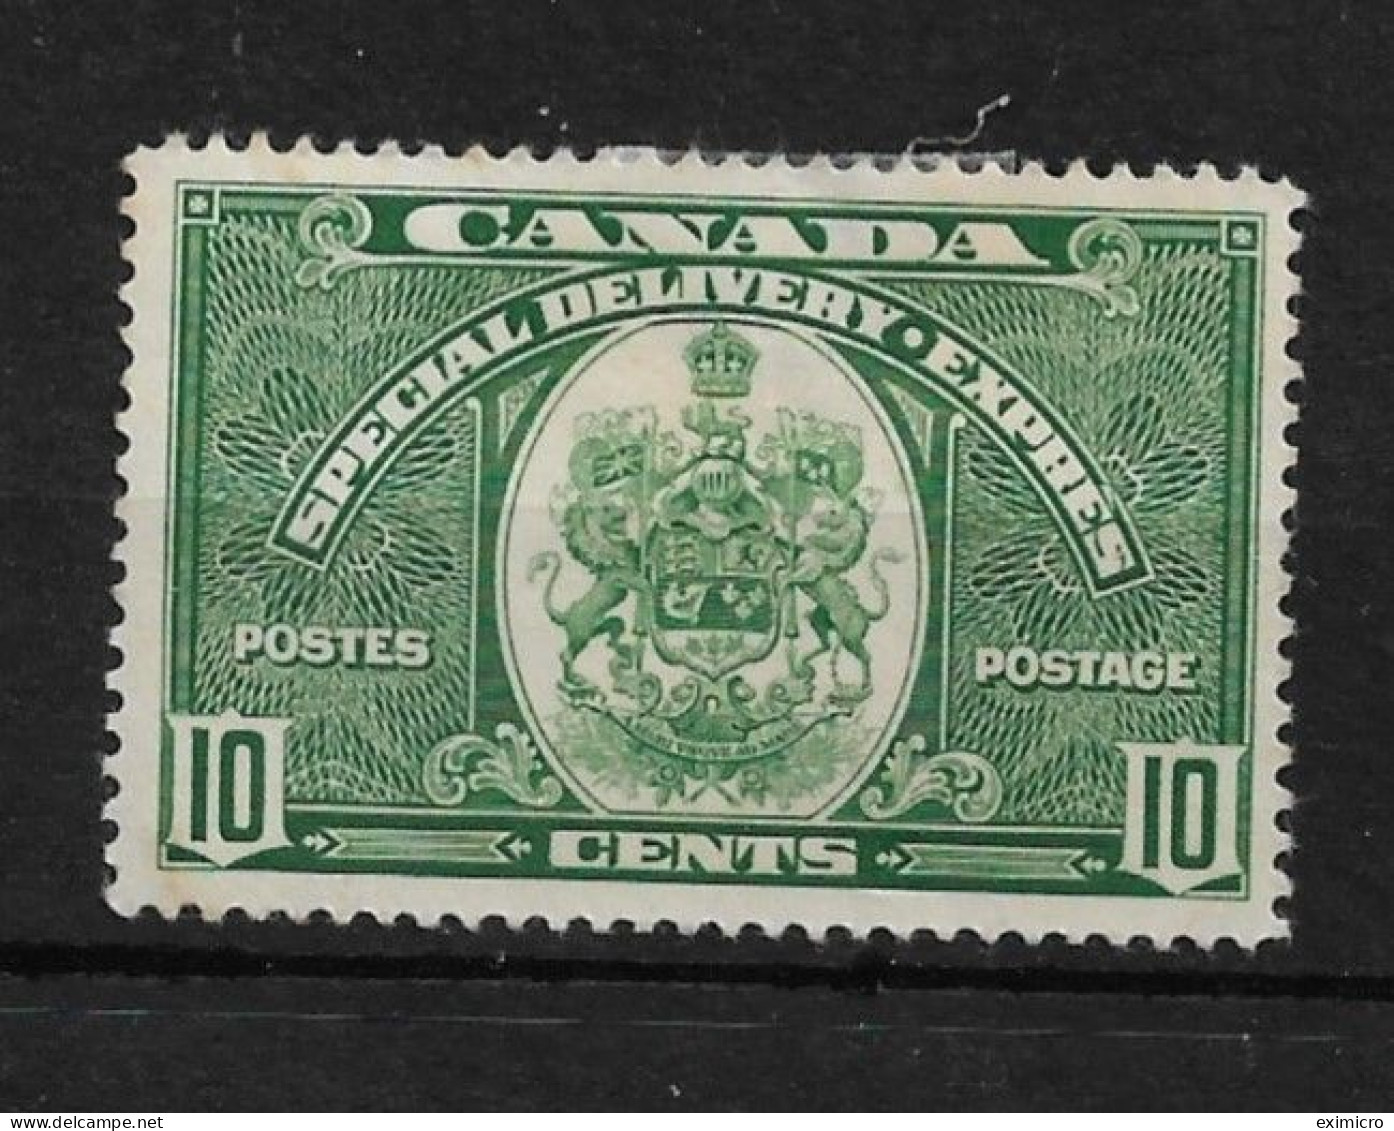 CANADA 1939 10c SPECIAL DELIVERY SG S9 MOUNTED MINT Cat £24 - Espressi